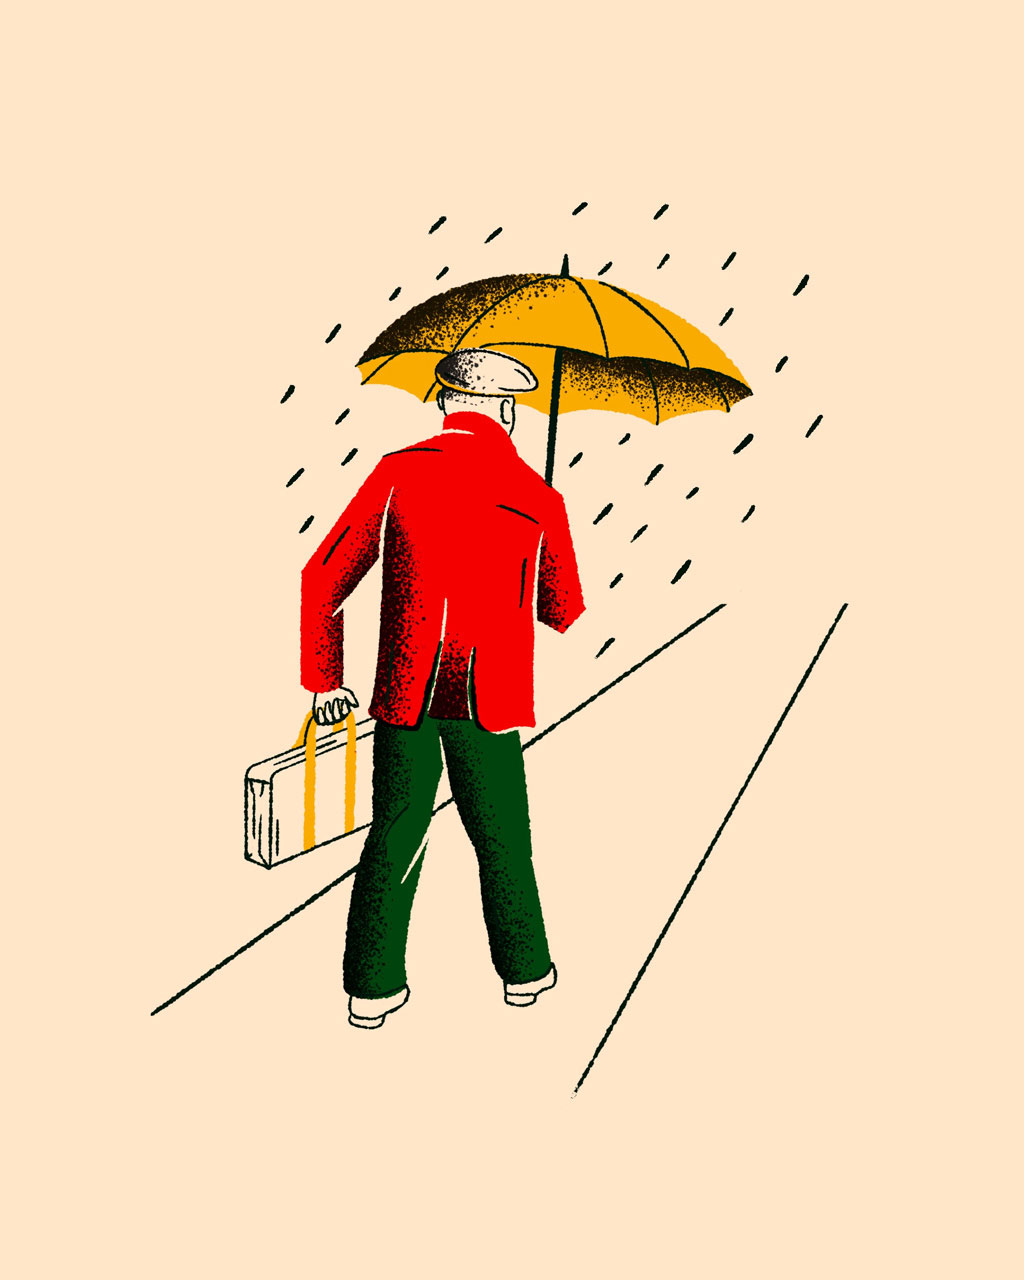 Illustration of man with umbrella and briefcase walking in the rain.